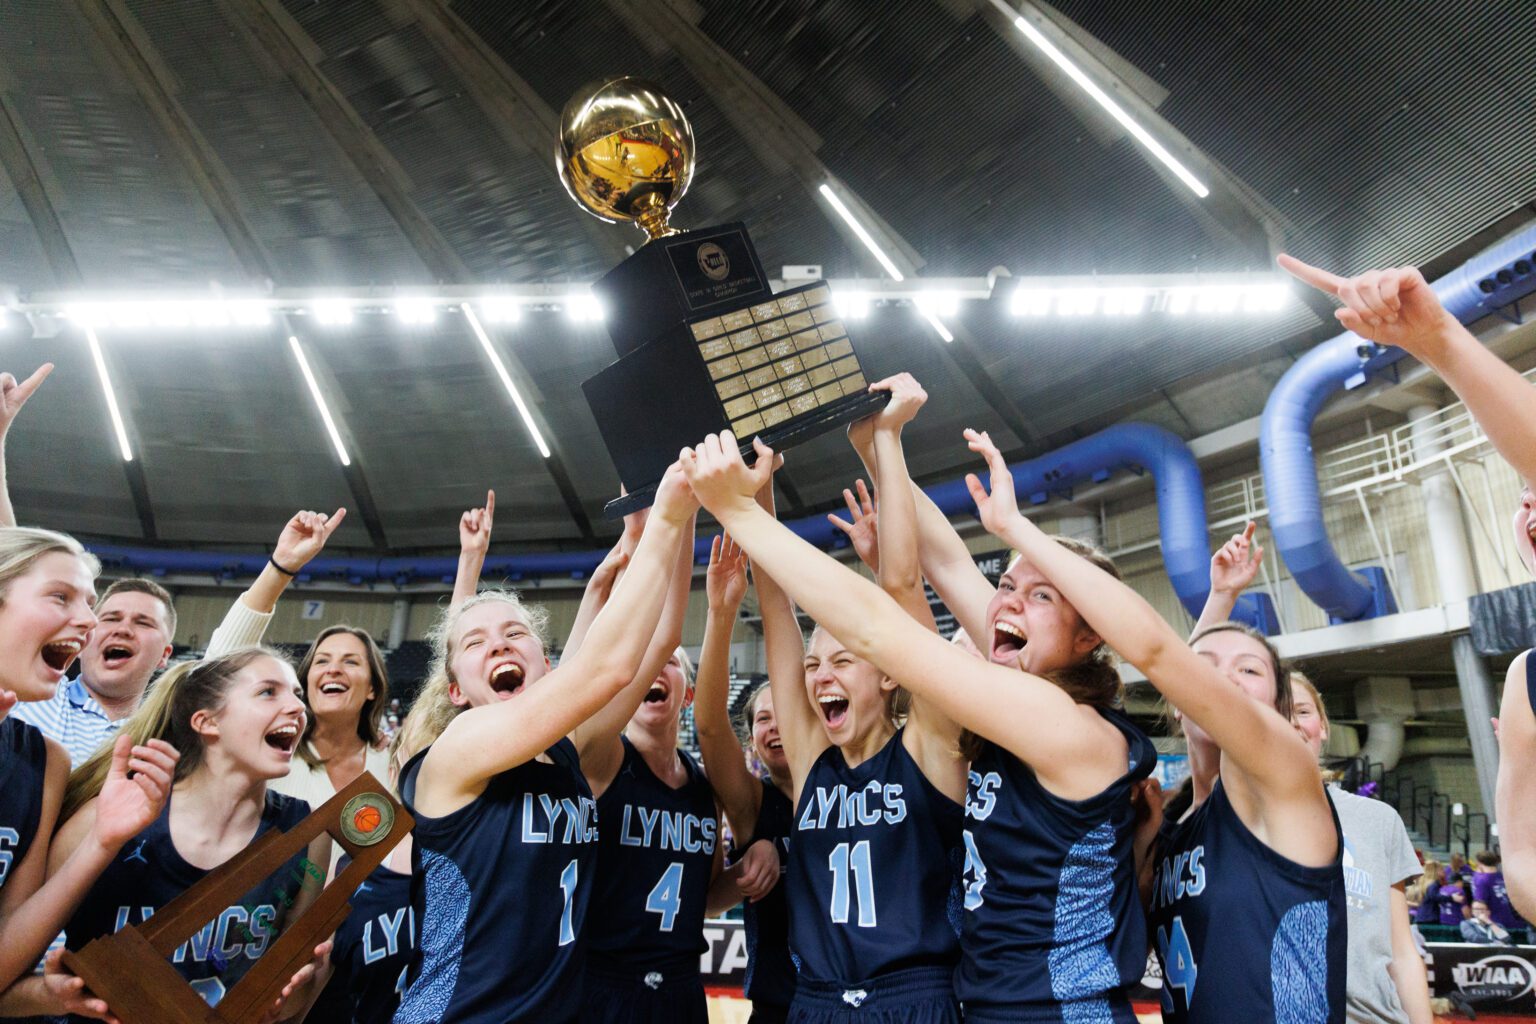 Lynden Christian celebrates after beating Nooksack Valley 57-56 in overtime to win the girls 1A state championship title at the Yakima Valley SunDome on March 5.